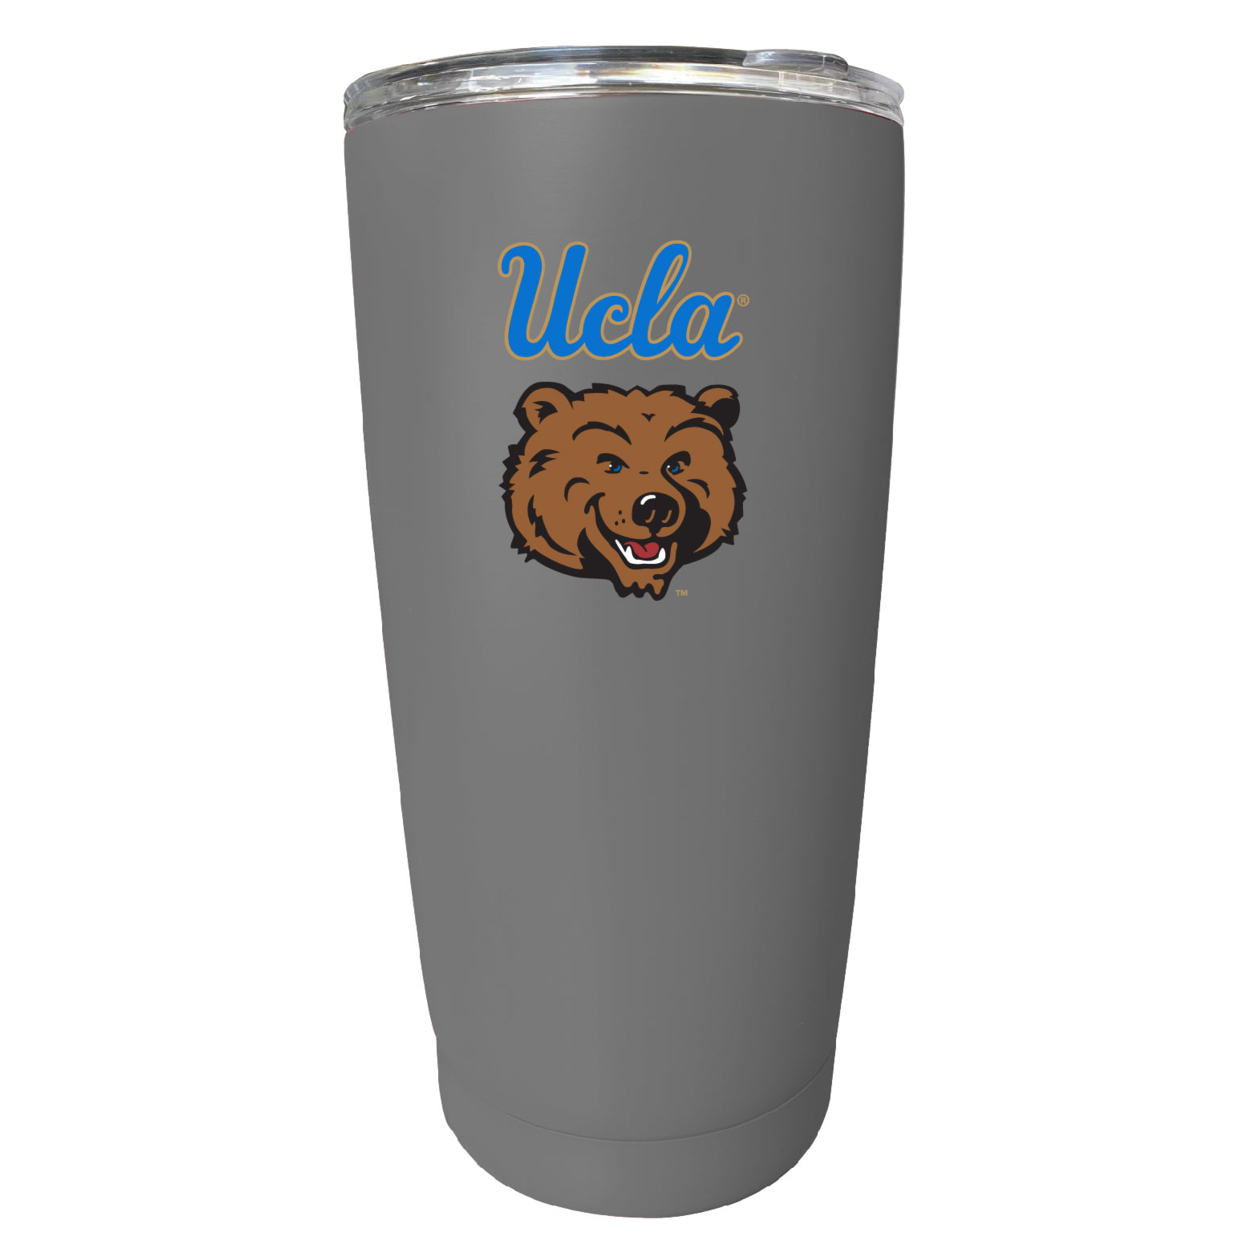 UCLA Bruins 16 Oz Stainless Steel Insulated Tumbler - Gray